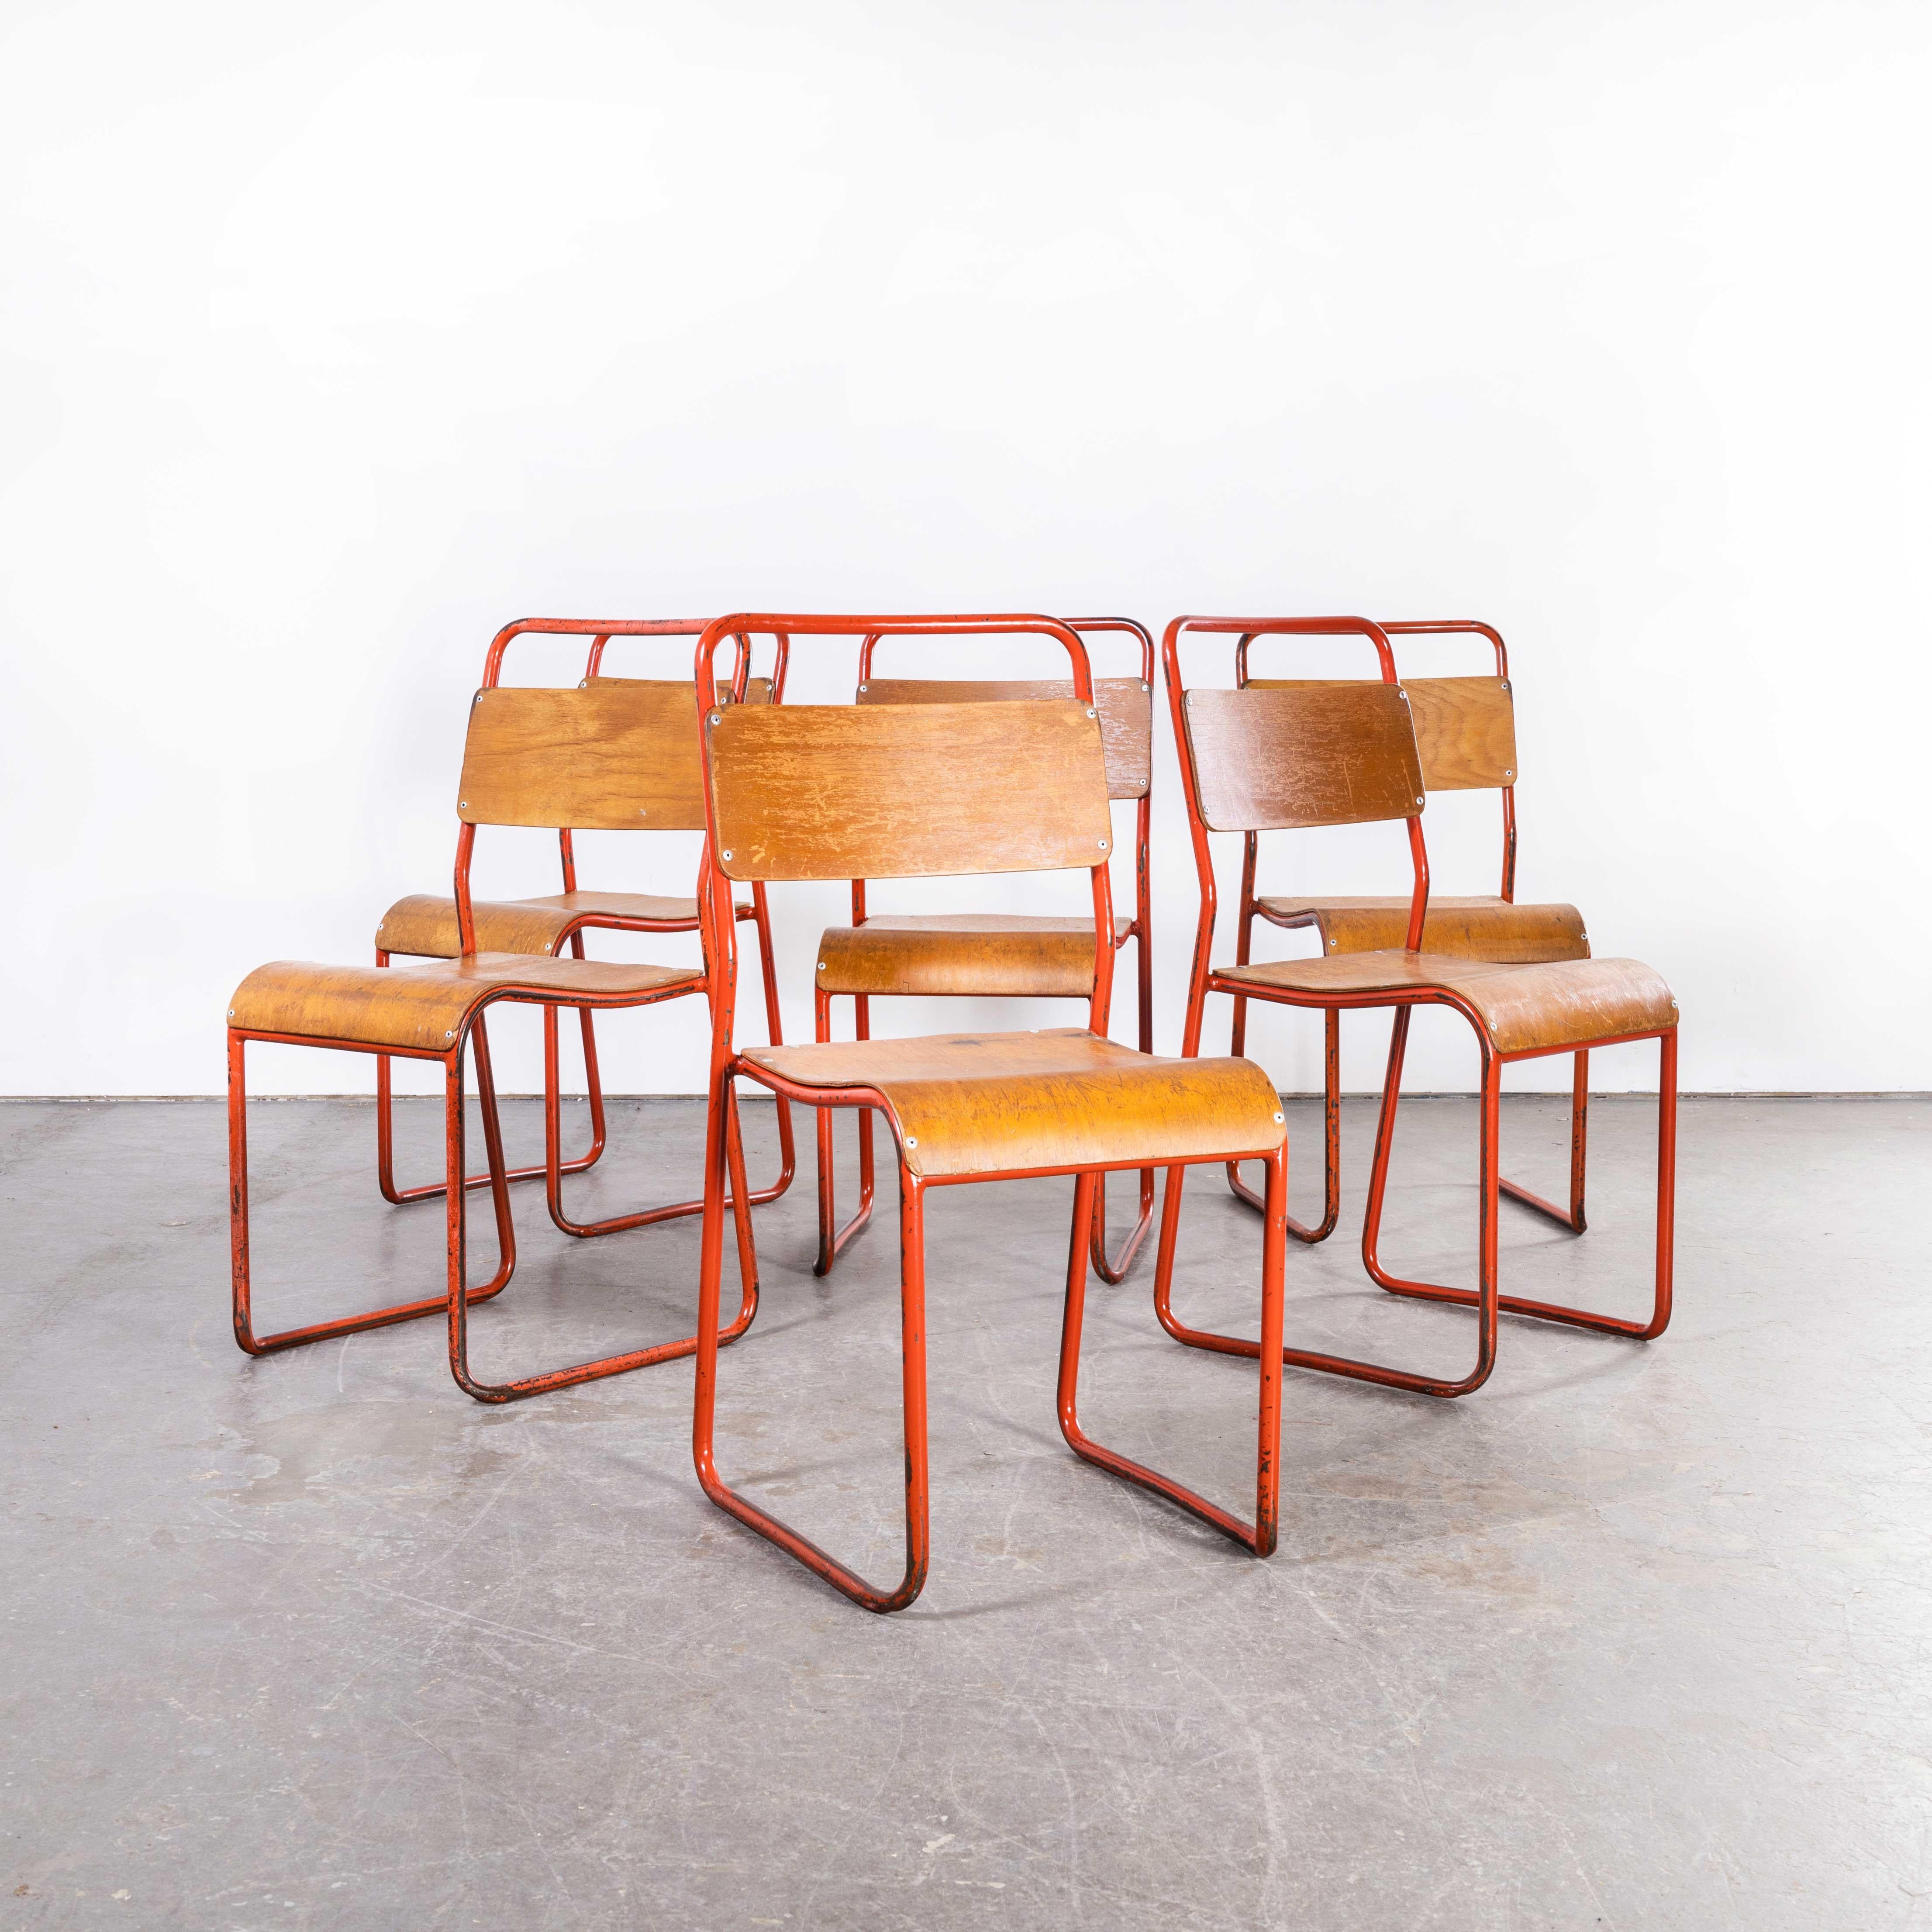 1950’s Cox Tubular Red Metal Dining Chairs – Set Of Six
1950’s Cox Tubular Red Metal Dining Chairs – Set Of Six. Cox was one of the largest producers of tubular stacking chairs initially developed by the Bauhaus movement. These chairs are from the